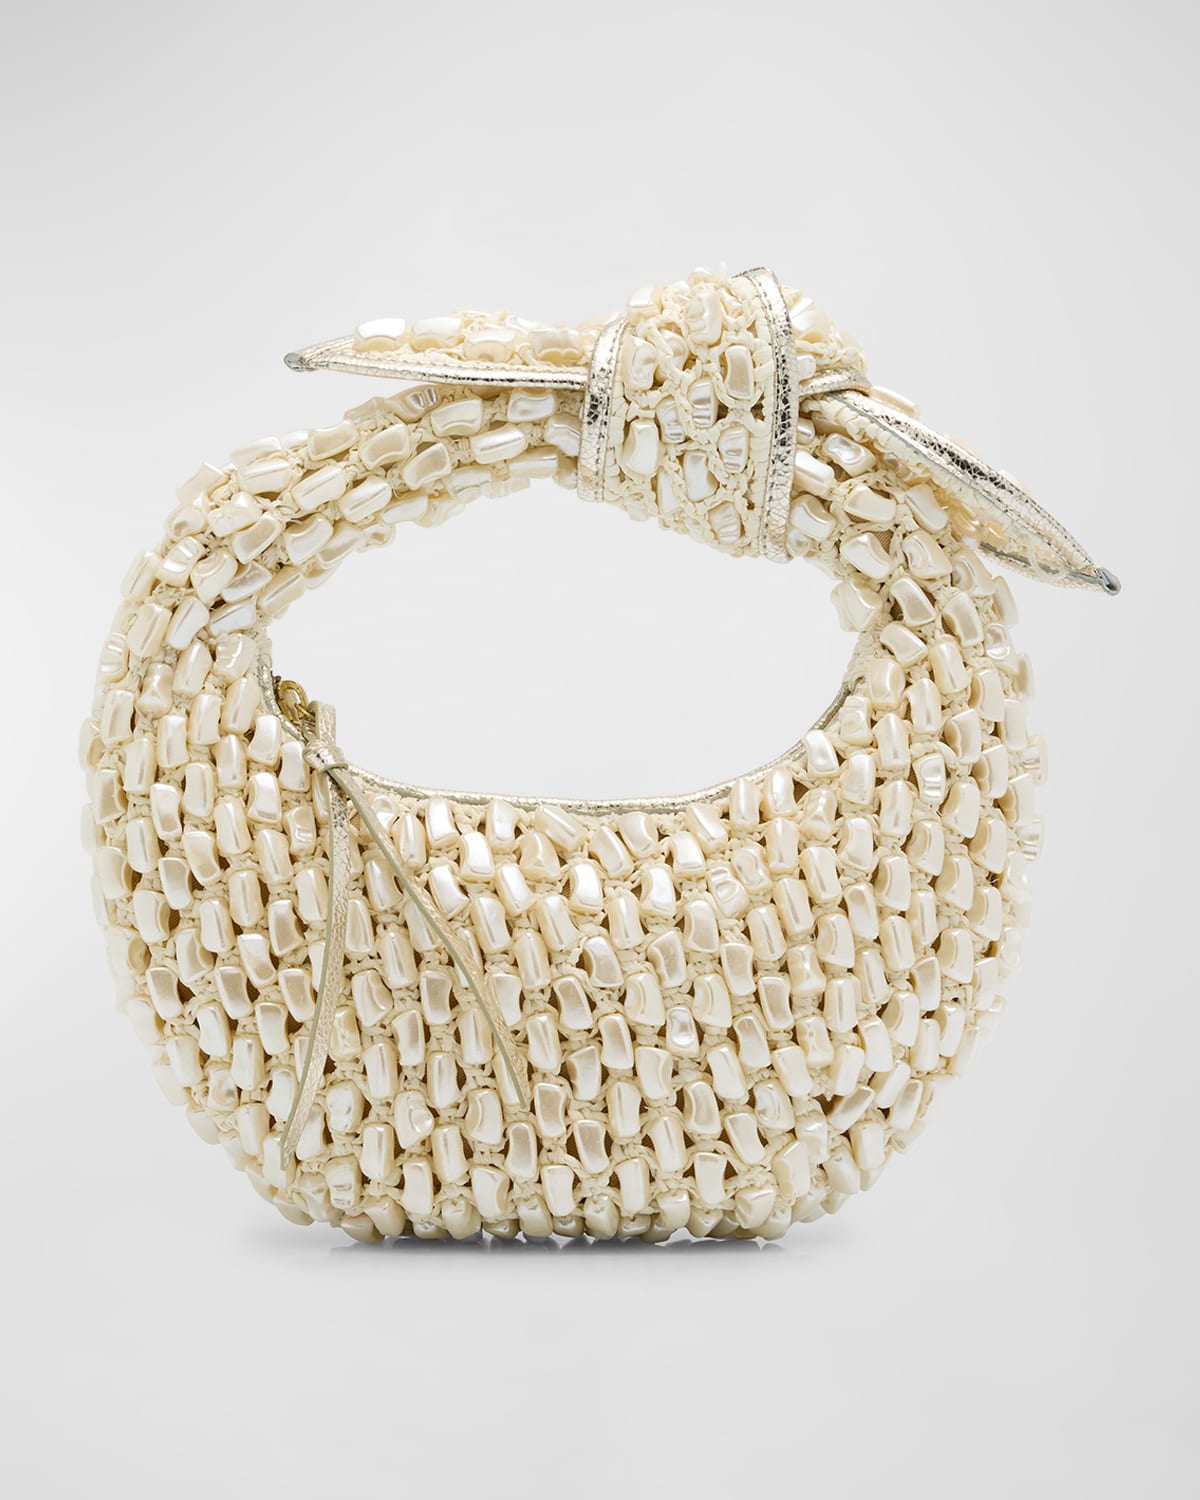 The Josie Pearly Knot Top-Handle Bag